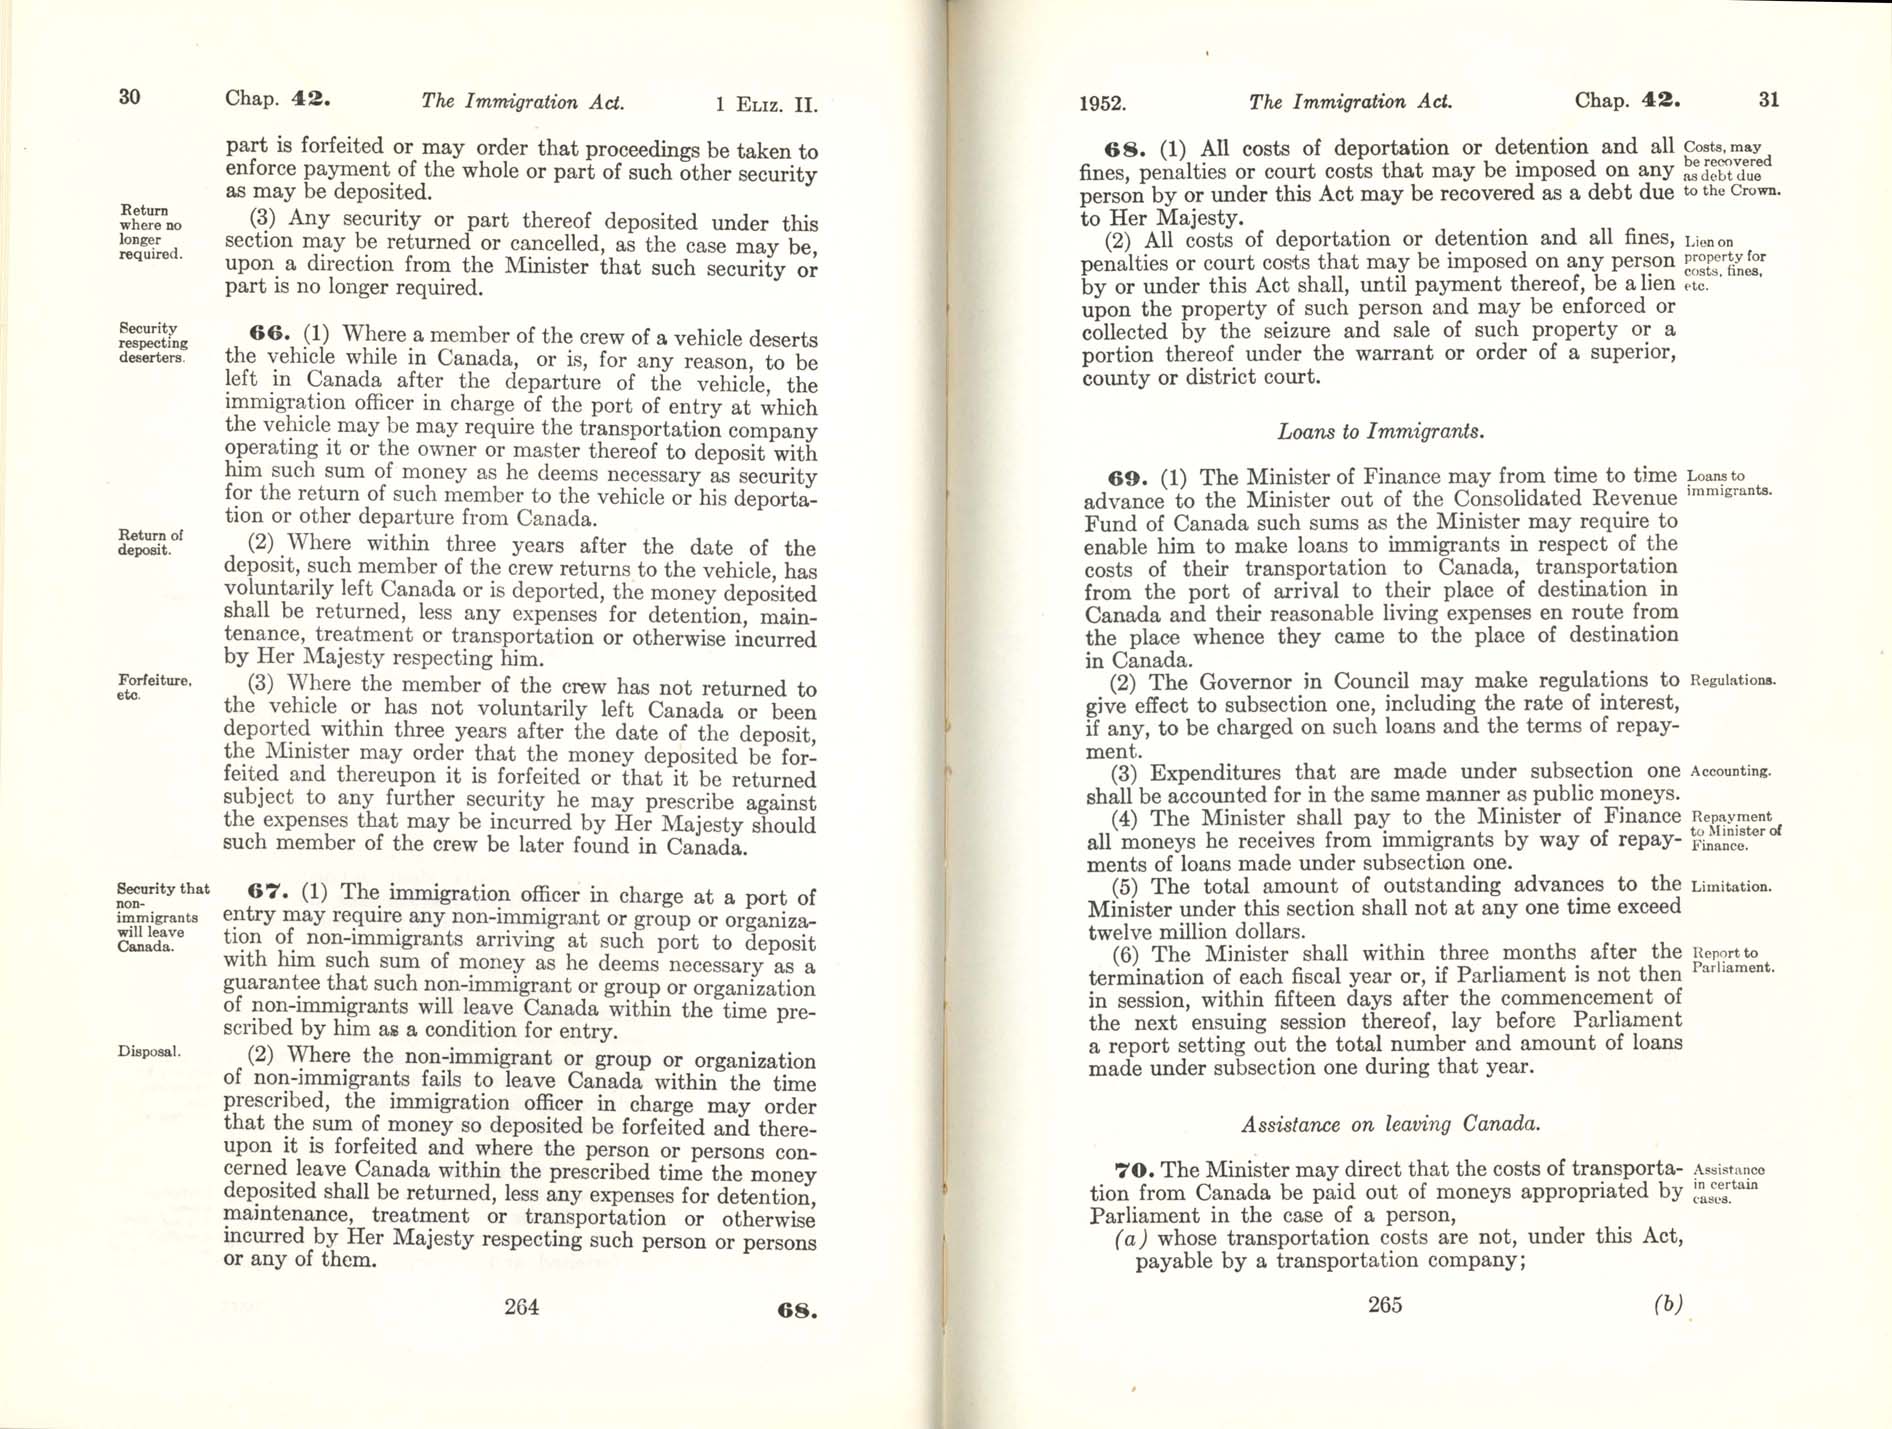 CHAP 42 Page 264, 265 Immigration Act, 1952